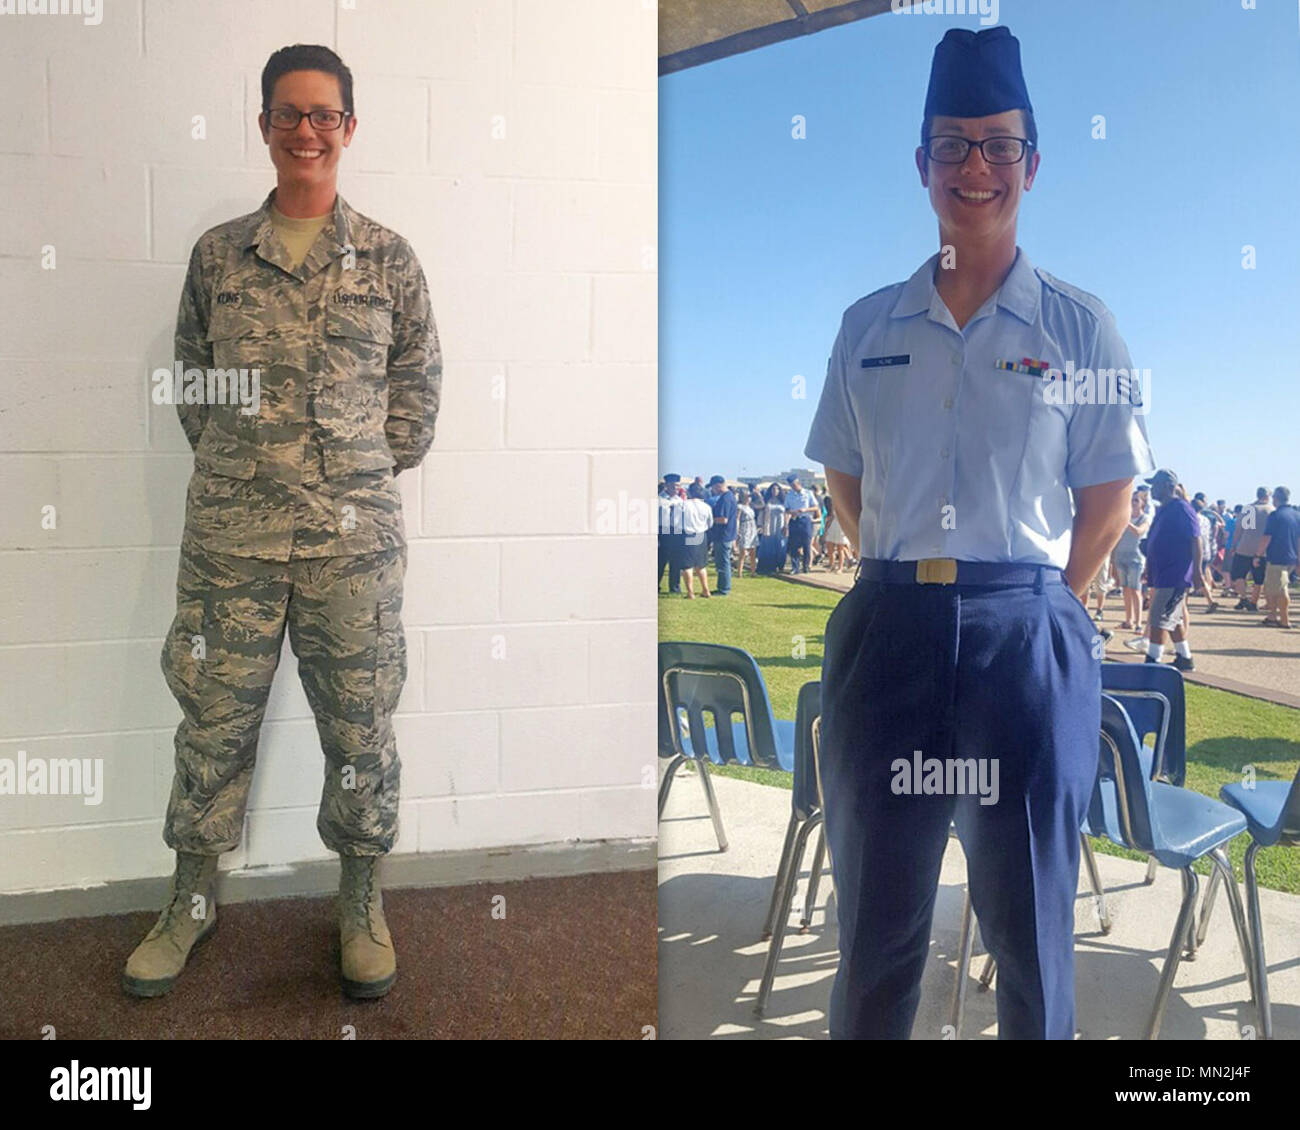 SCHRIEVER AIR FORCE BASE, Colo. -- Airman 1st Class Kristyn Kline, Top  Basic Military Training Graduate, poses for a photo in her Airman Battle  Uniform (left) and her Air Force blues uniform (